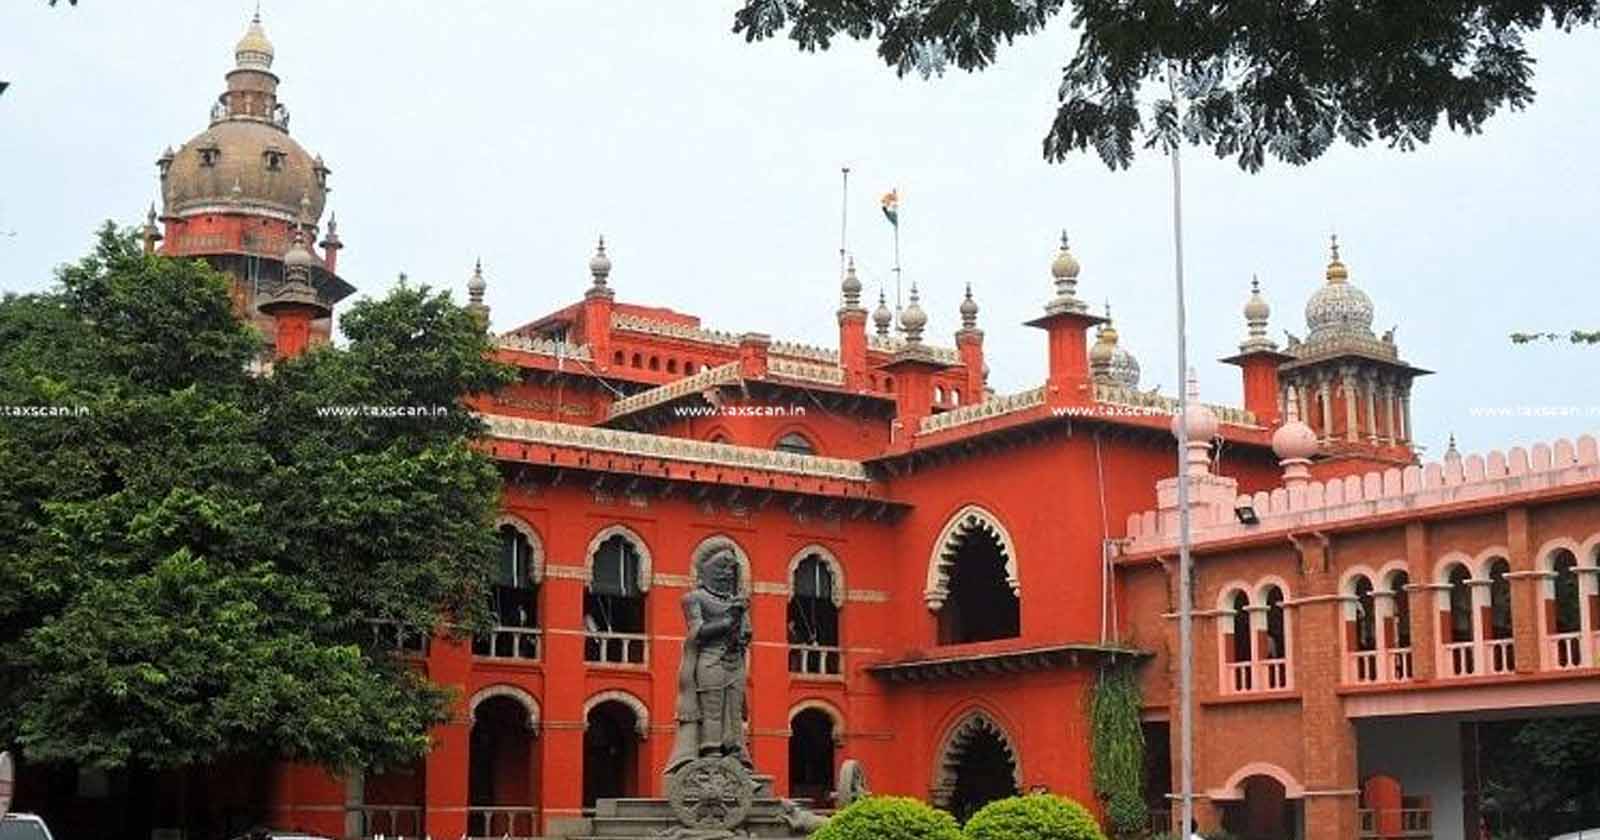 GST penalty appeal - GST - Time limit for GST penalty appeal - Madras High Court - Imposition of gst penalty - Extension of appeal - taxscan